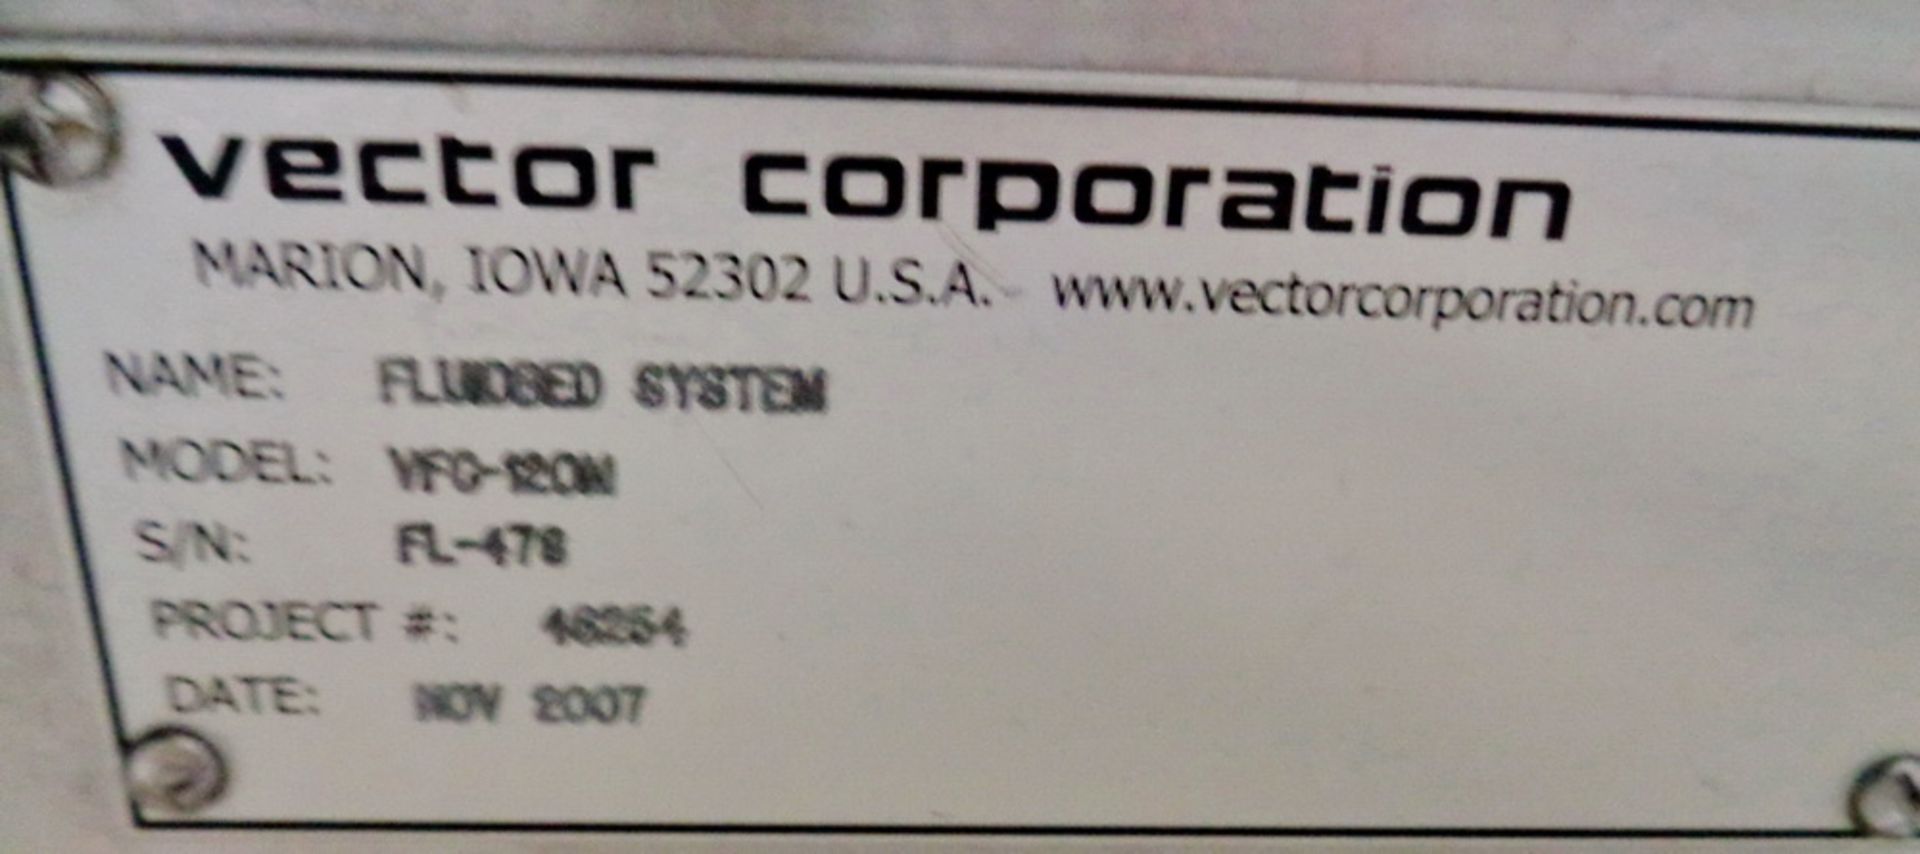 Vector Stainless Steel Fluid Bed Dryer, Model VFC-120M, SN FL-478, Project #46254 and 46613 - Image 10 of 35